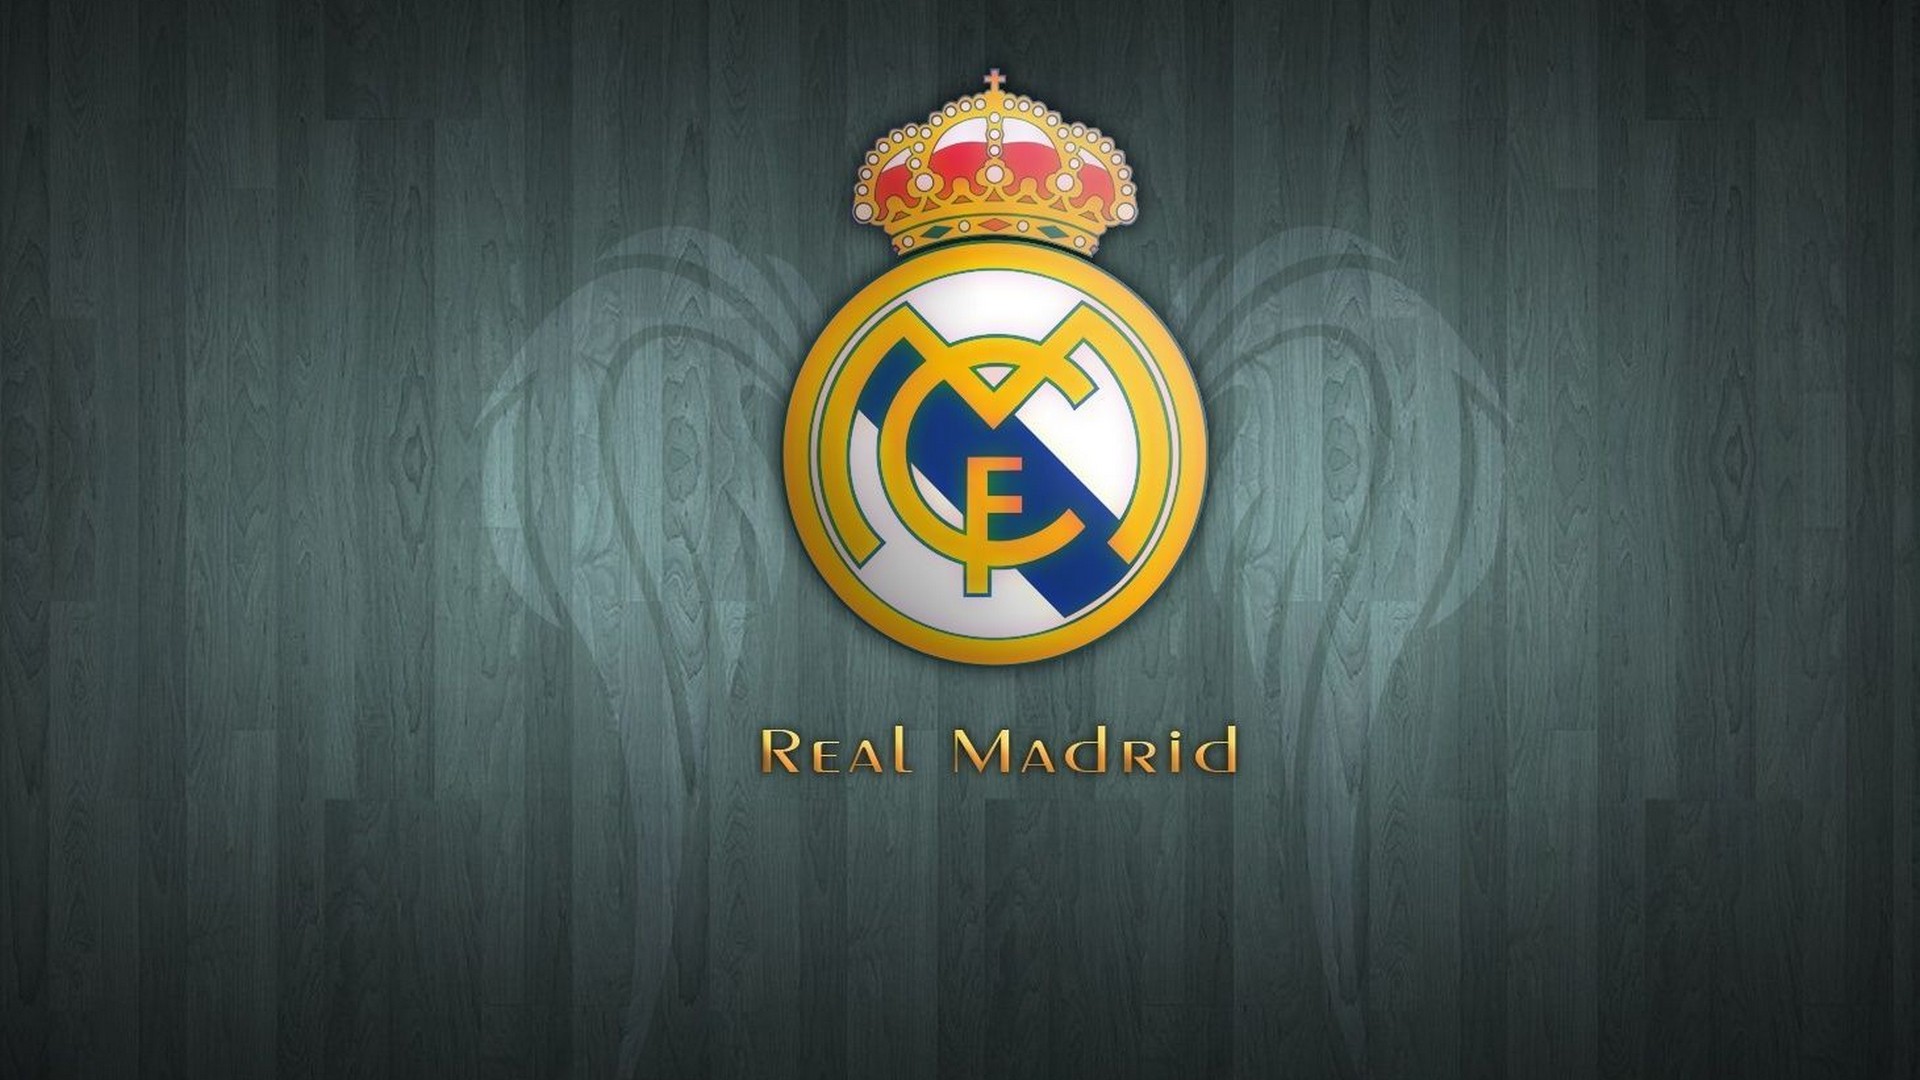 Wallpapers Real Madrid With Resolution 1920X1080 pixel. You can make this wallpaper for your Mac or Windows Desktop Background, iPhone, Android or Tablet and another Smartphone device for free